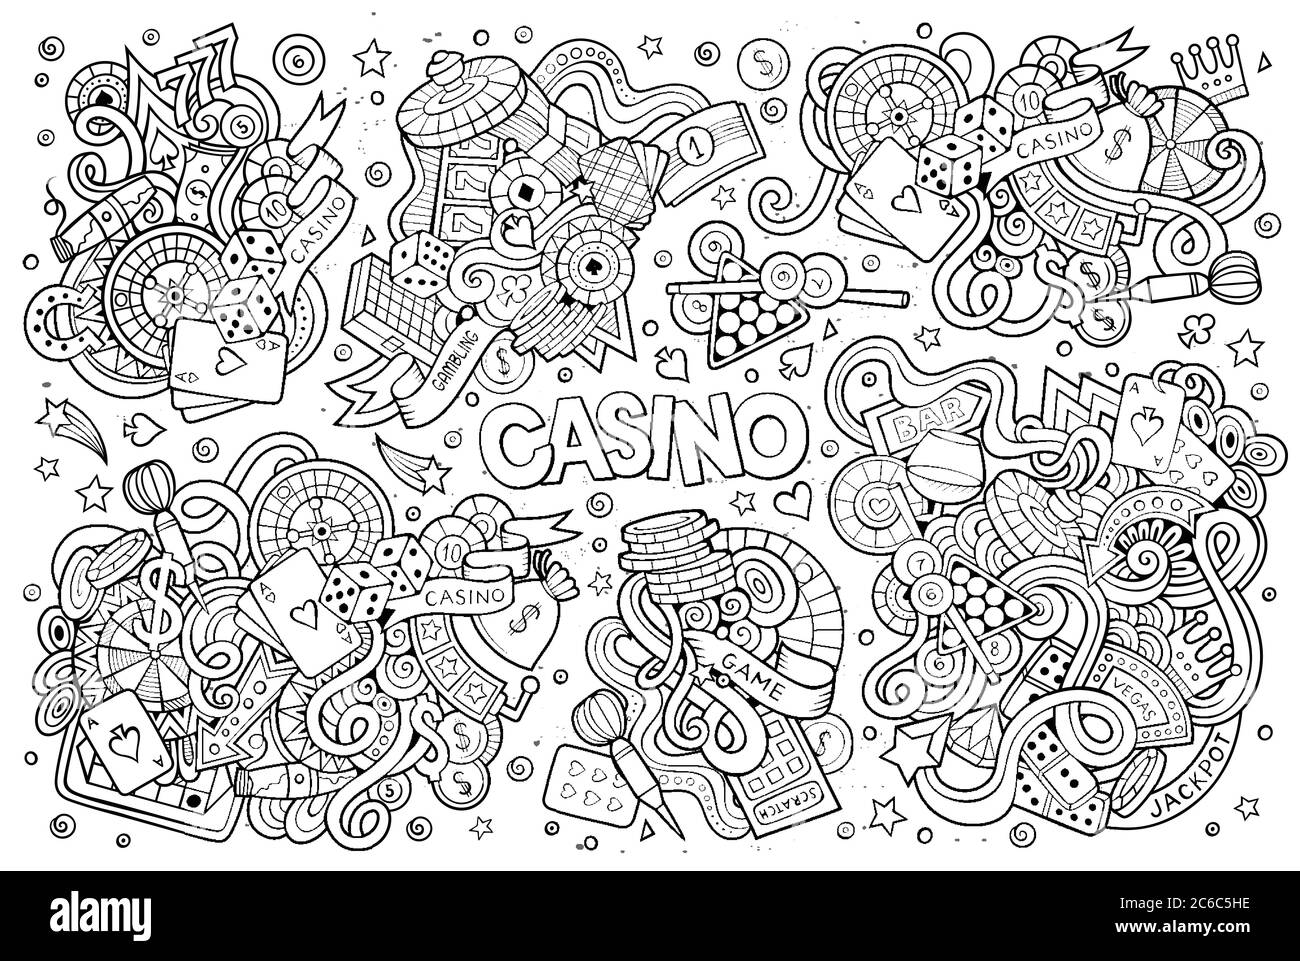 Sketchy vector hand drawn doodles cartoon set of Casino objects Stock Vector